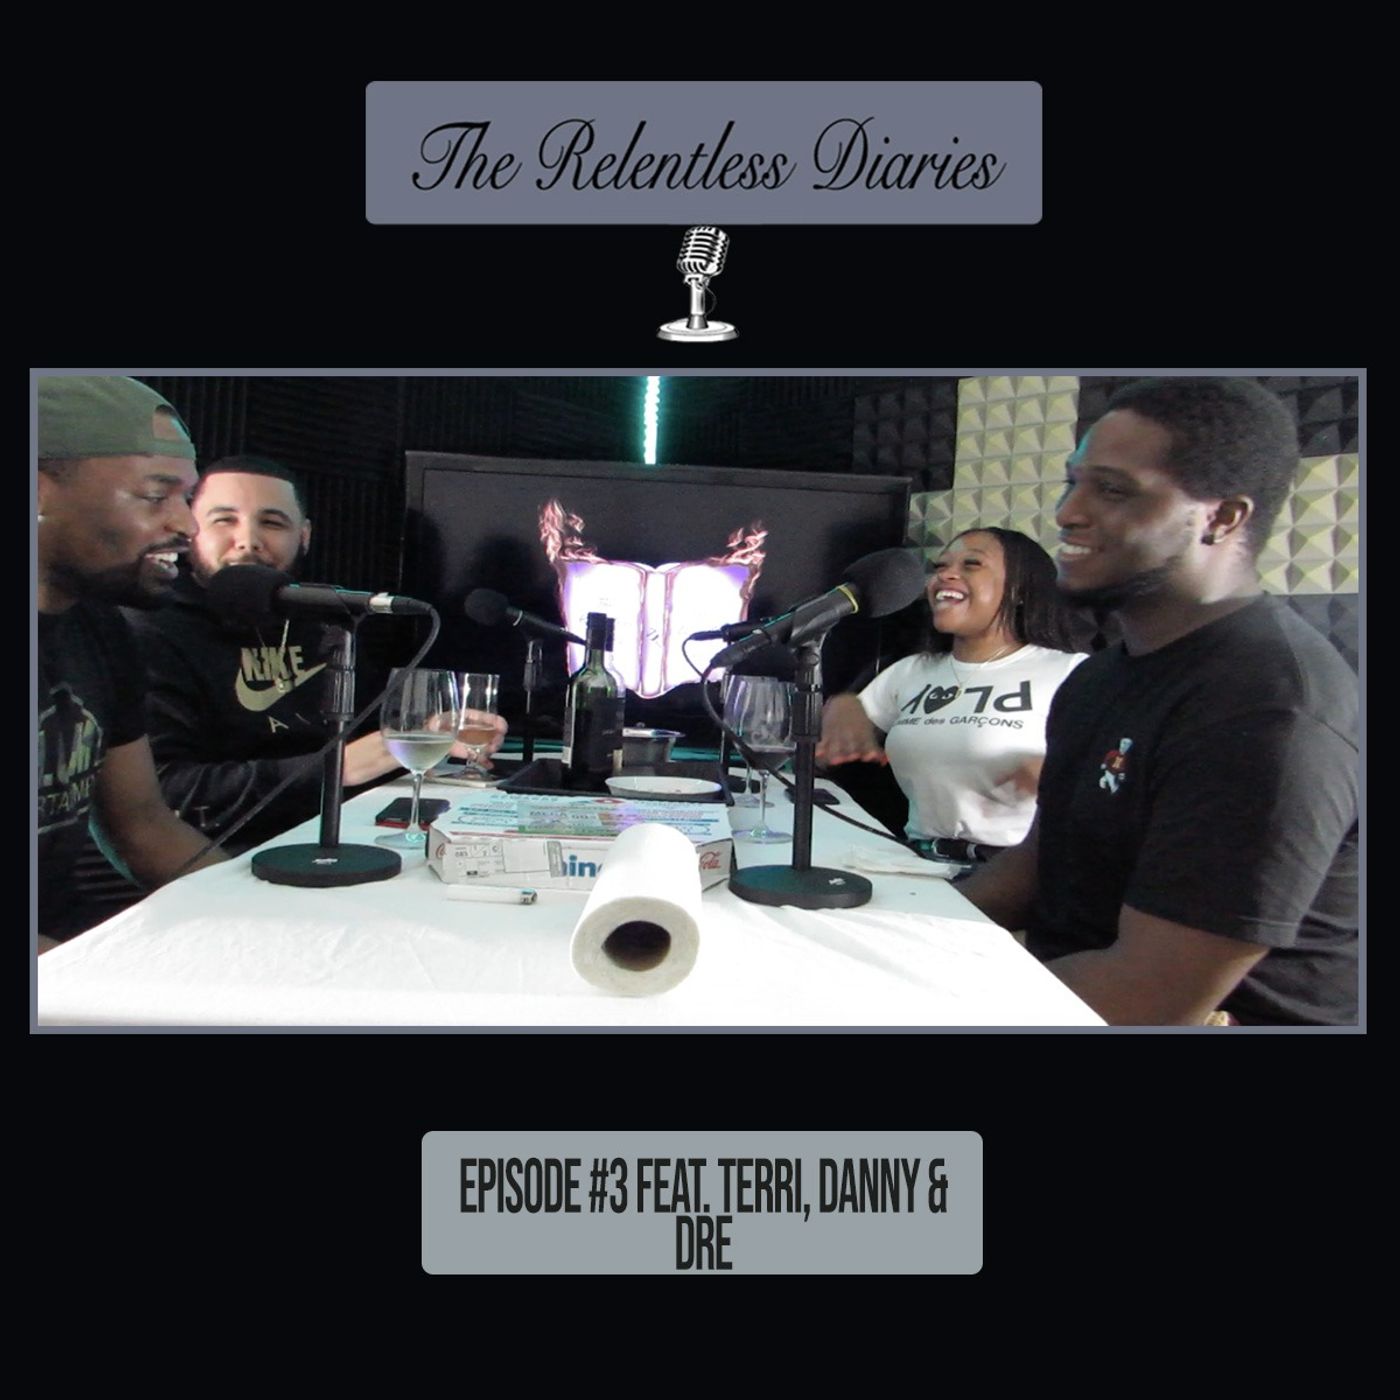 The Relentless Diaries, Episode 3: ”If It Don’t Apply, Let It Fly, If You Can’t Compete, Claim Defeat” Featuring Dre, Terri and Danny